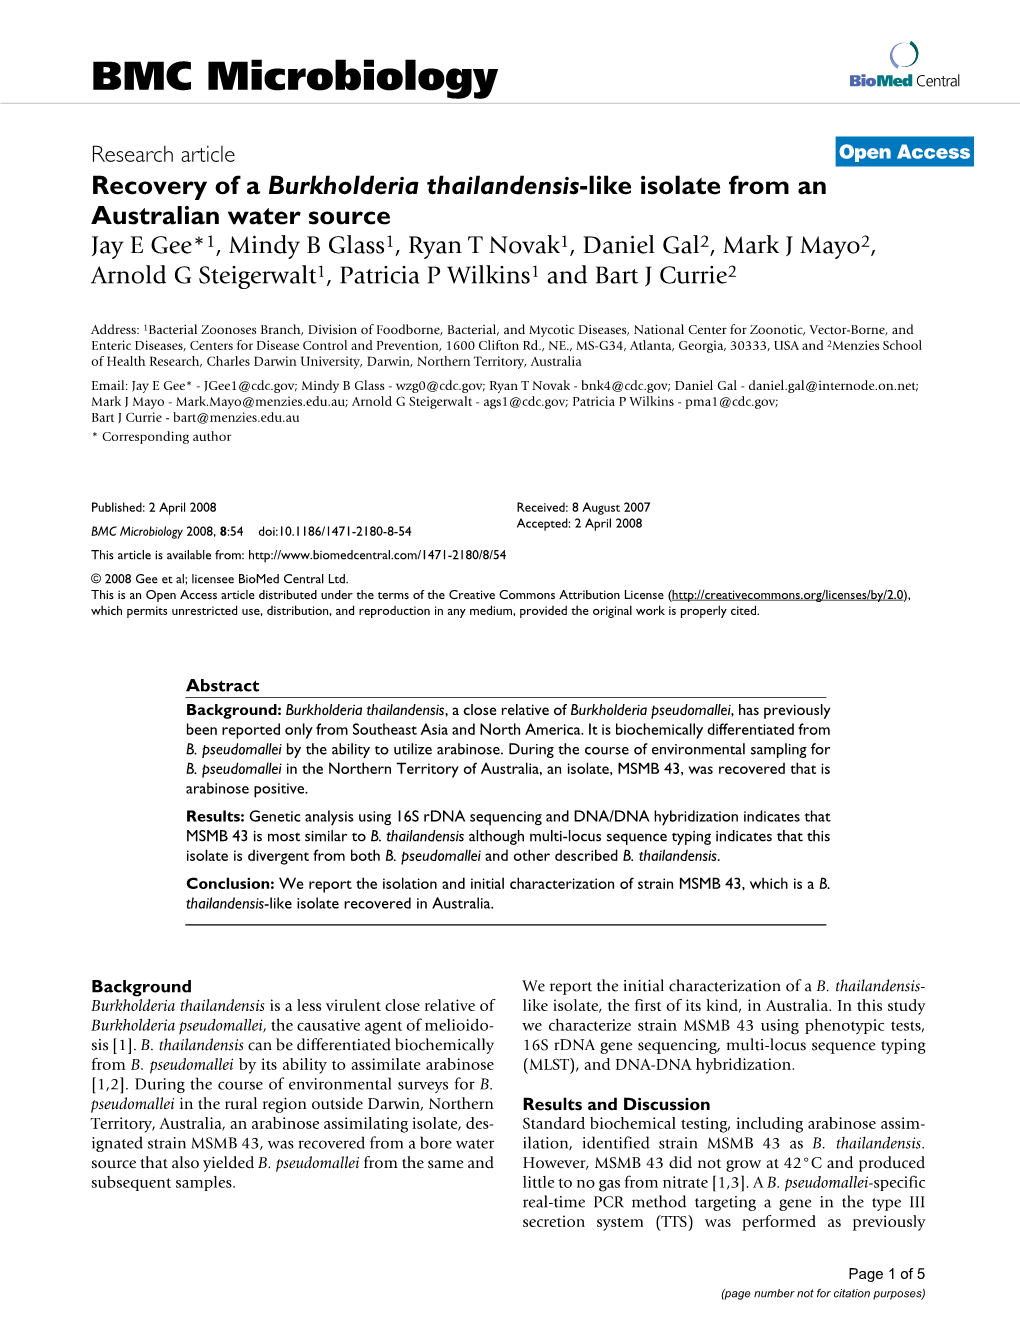 Recovery of a Burkholderia Thailandensis-Like Isolate from An